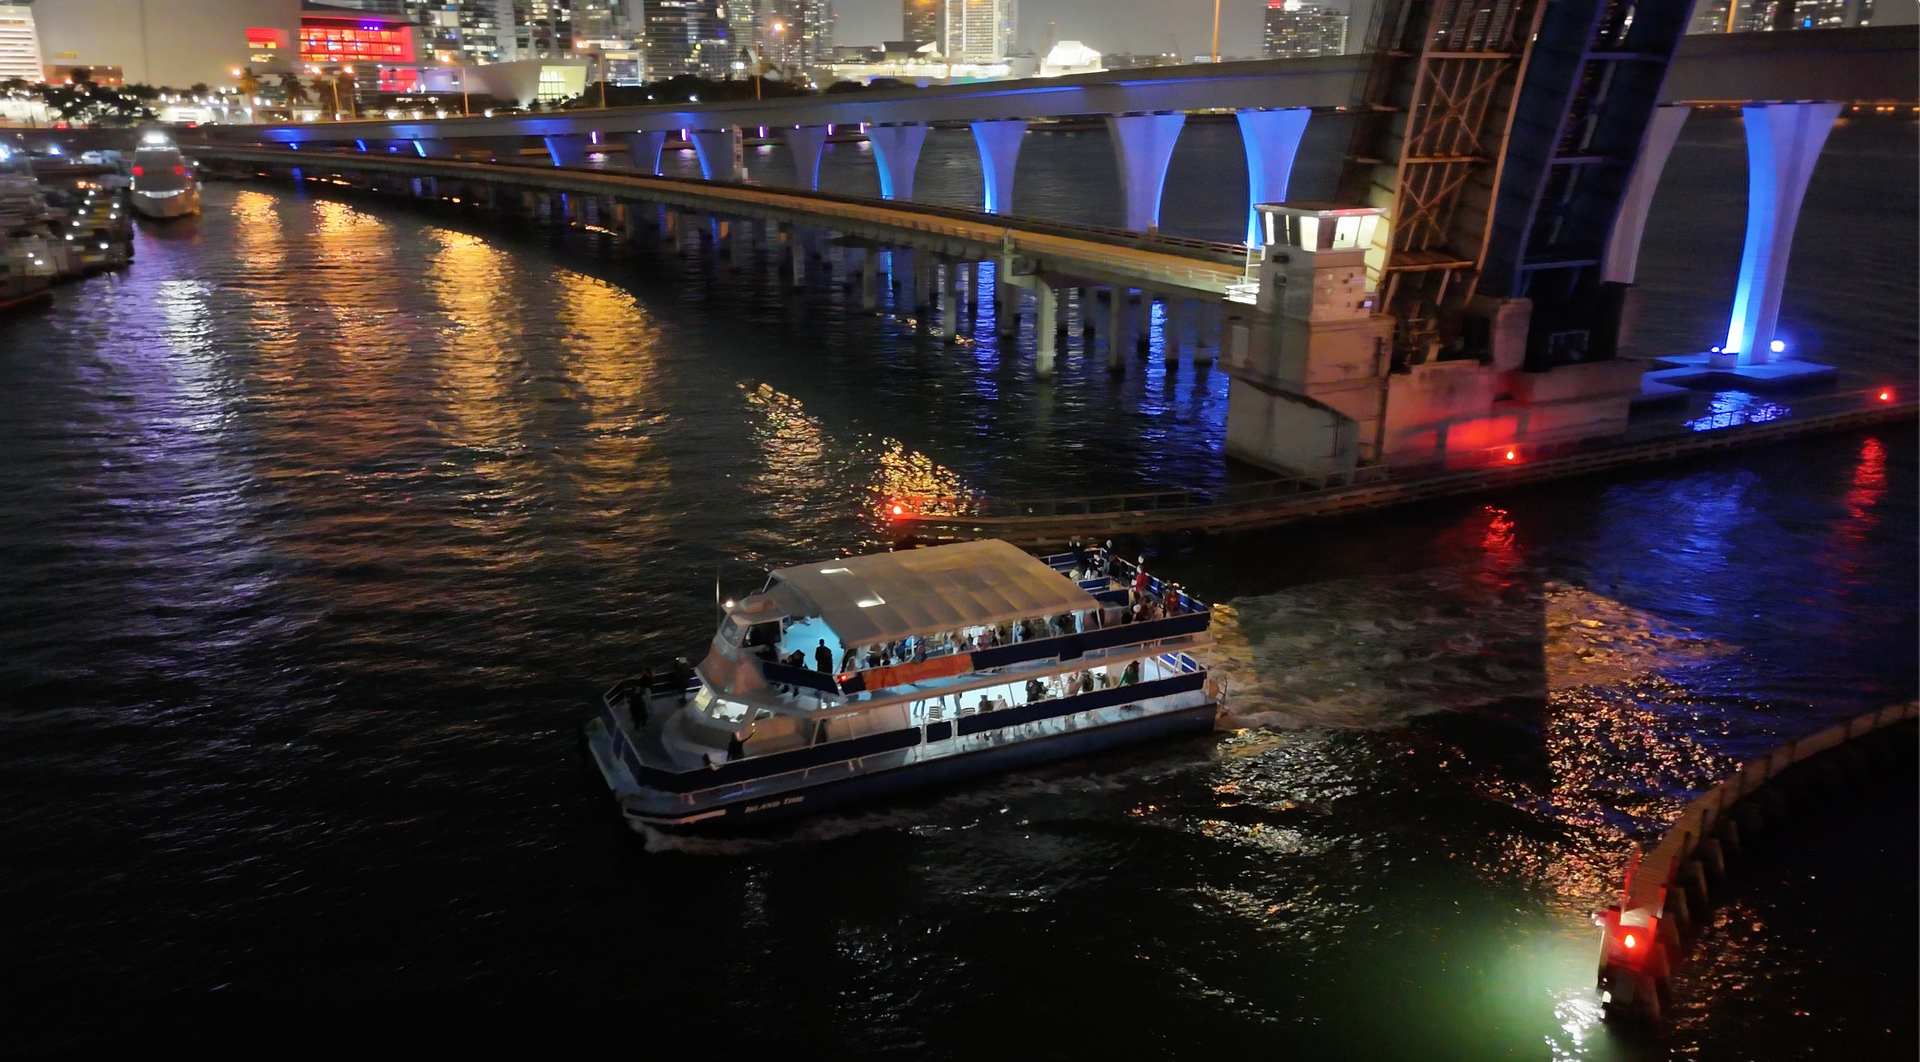 The Miami Night Cruise is one of the top attractions in Miami Florida for locals to do. Departing from Bayside Marketplace, an open air Mall and now with the Pier 5 bar that just opened its door, after your Miami cruise, you have lots of options to enjoy yourself. A Miami Sunset Boat cruise is the perfect way to begin your weekend.